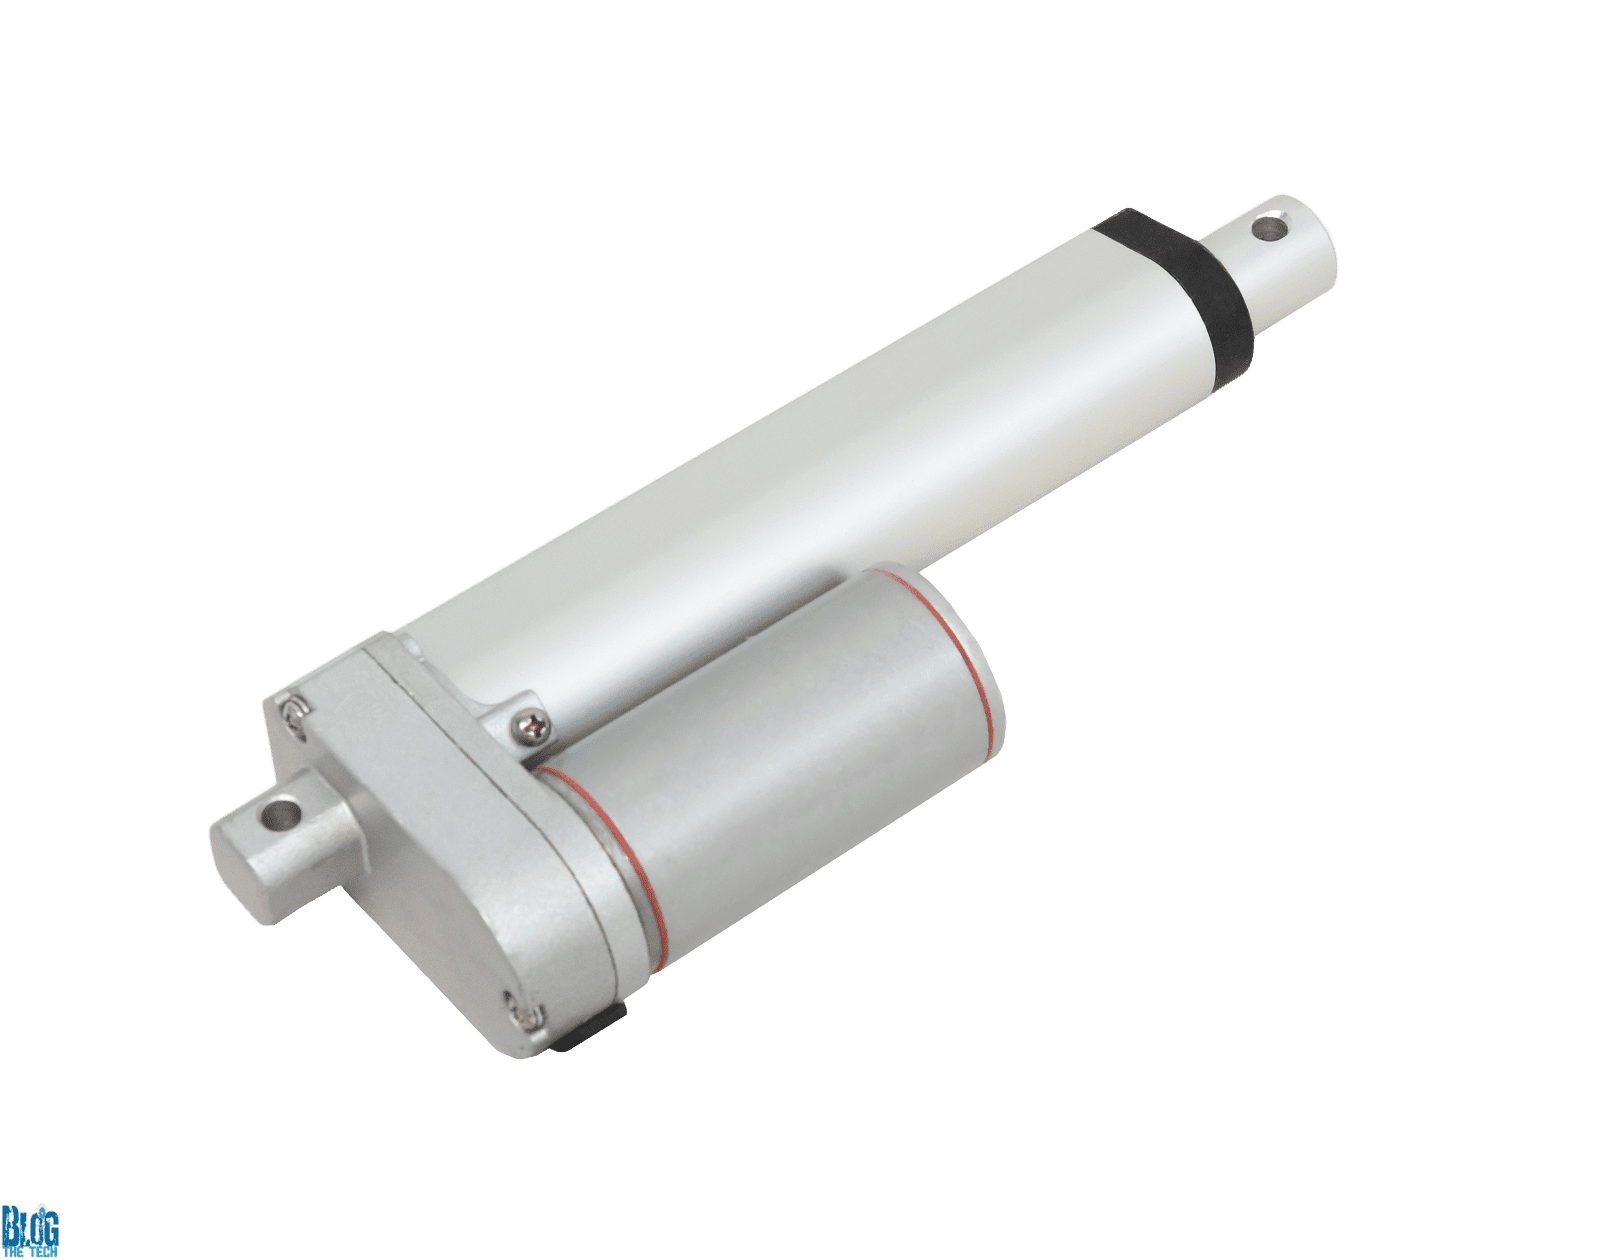 Linear Actuators Comparison Which One Is The Best Tool For Your Goal